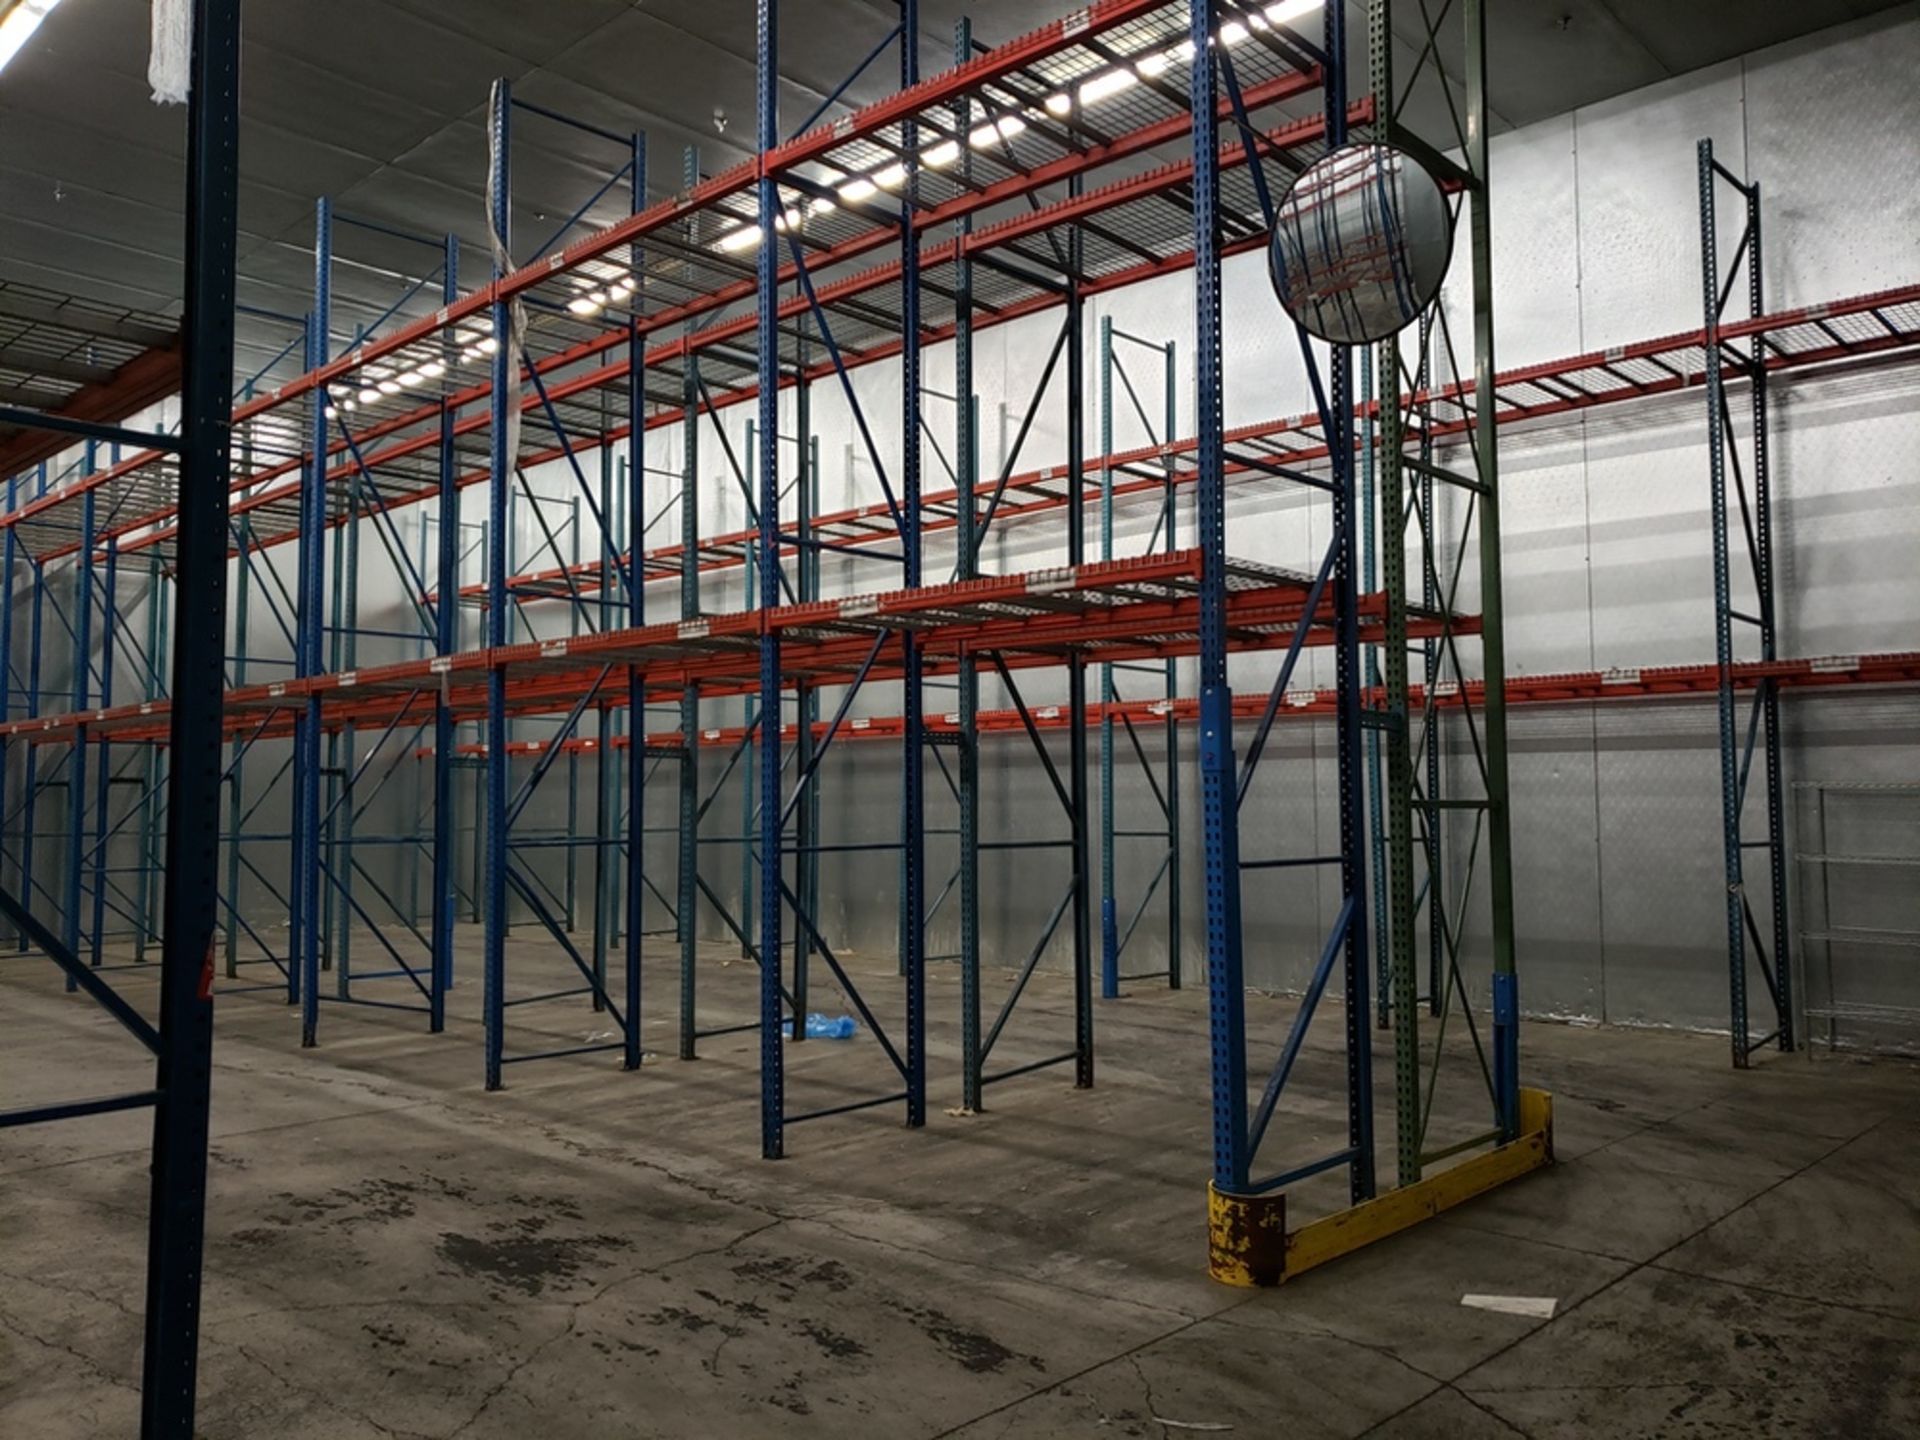 Lot of Pallet Racking, (49) 42" X 16' Uprights, (172) 8' Beams, (172) Wire Shelves | Rig Fee: $1500 - Image 2 of 3